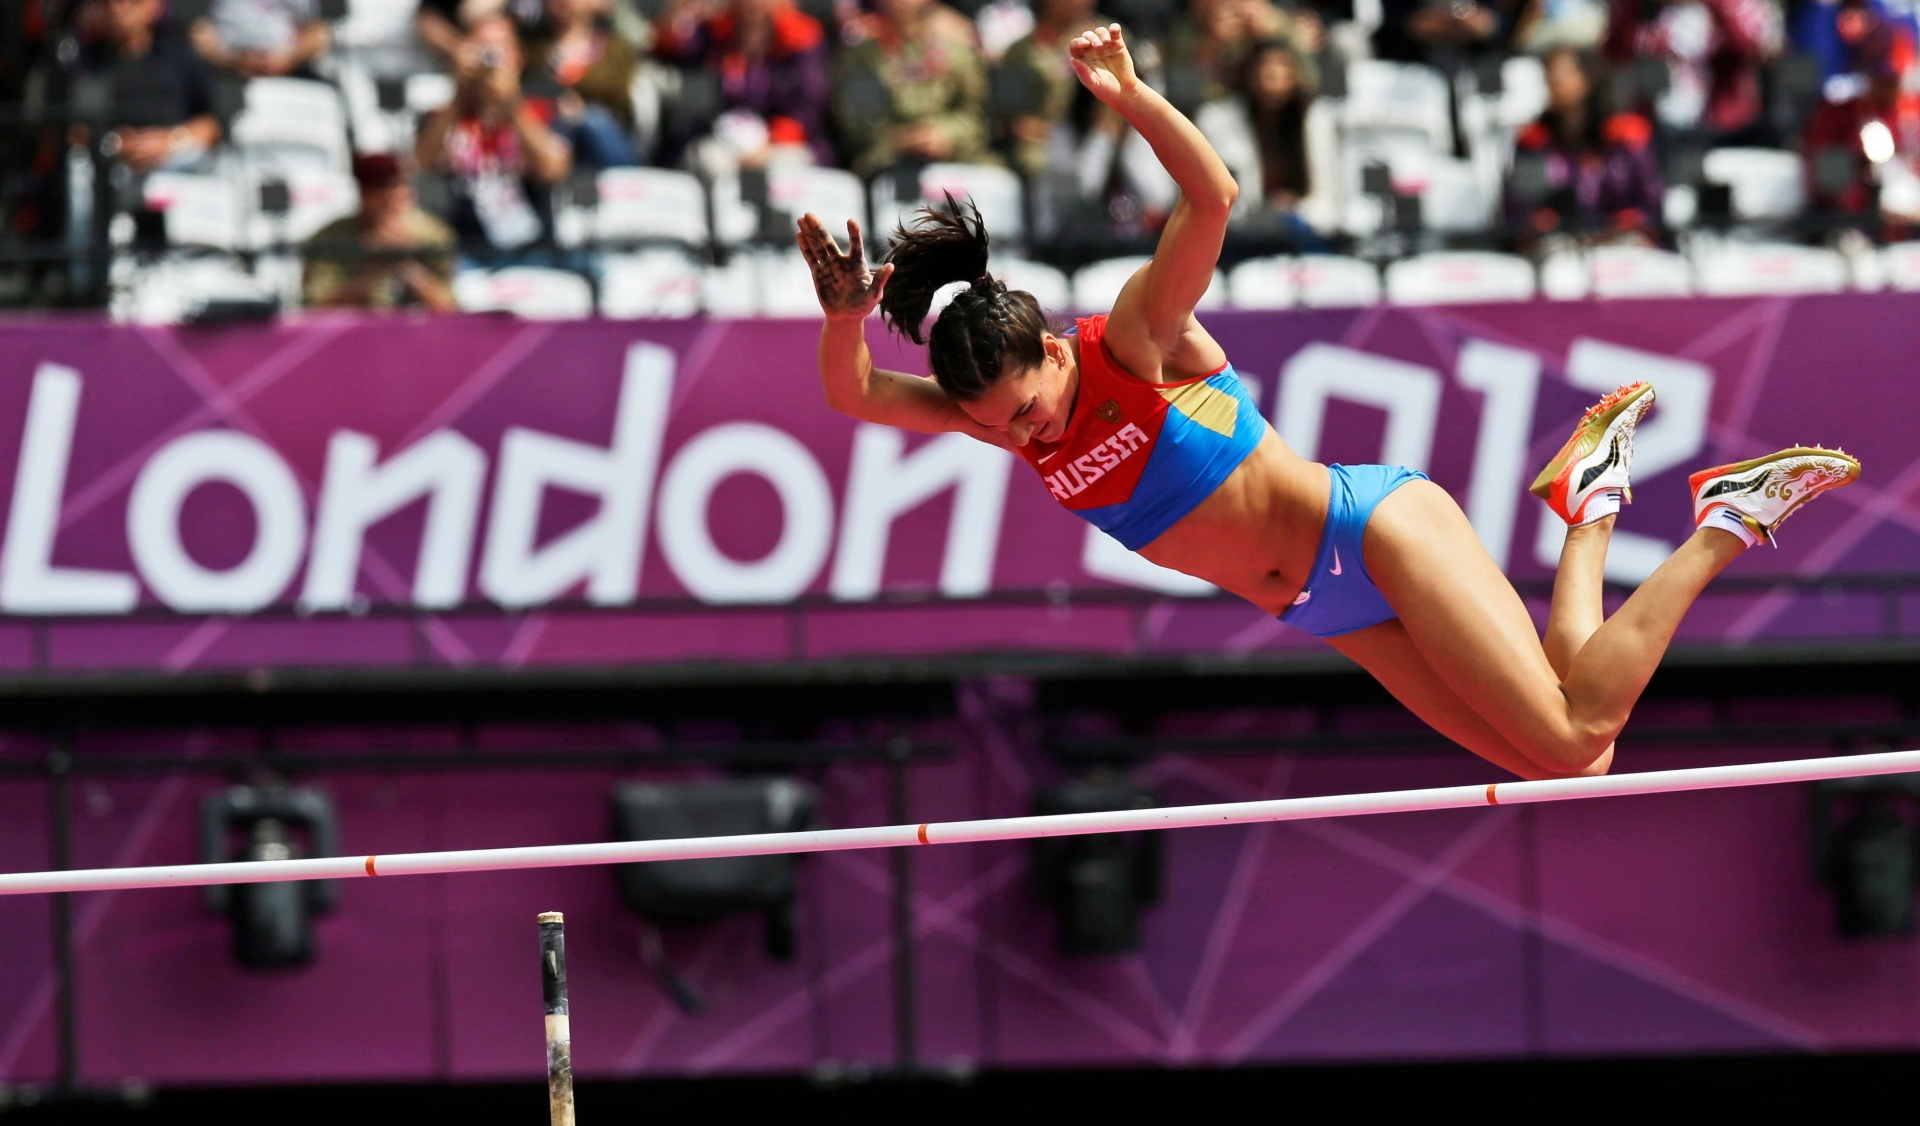 FILE - In this Aug. 4, 2012 file picture Russia's Yelena Isinbayeva competes in a women's pole vault qualification round during the athletics in the Olympic Stadium at the 2012 Summer Olympics, London.  The Court of Arbitration for Sport  was scheduled to issue a verdict Thursday  July 21, 2016 in the case of 68 Russian track and field athletes seeking to overturn the ban imposed by the IAAF following allegations of state-sponsored doping and cover-ups. Russia lost the appeal against an Olympic ban on its track and field athletes Thursday   (AP Photo/David J. Phillip,file) OLY Russia Doping